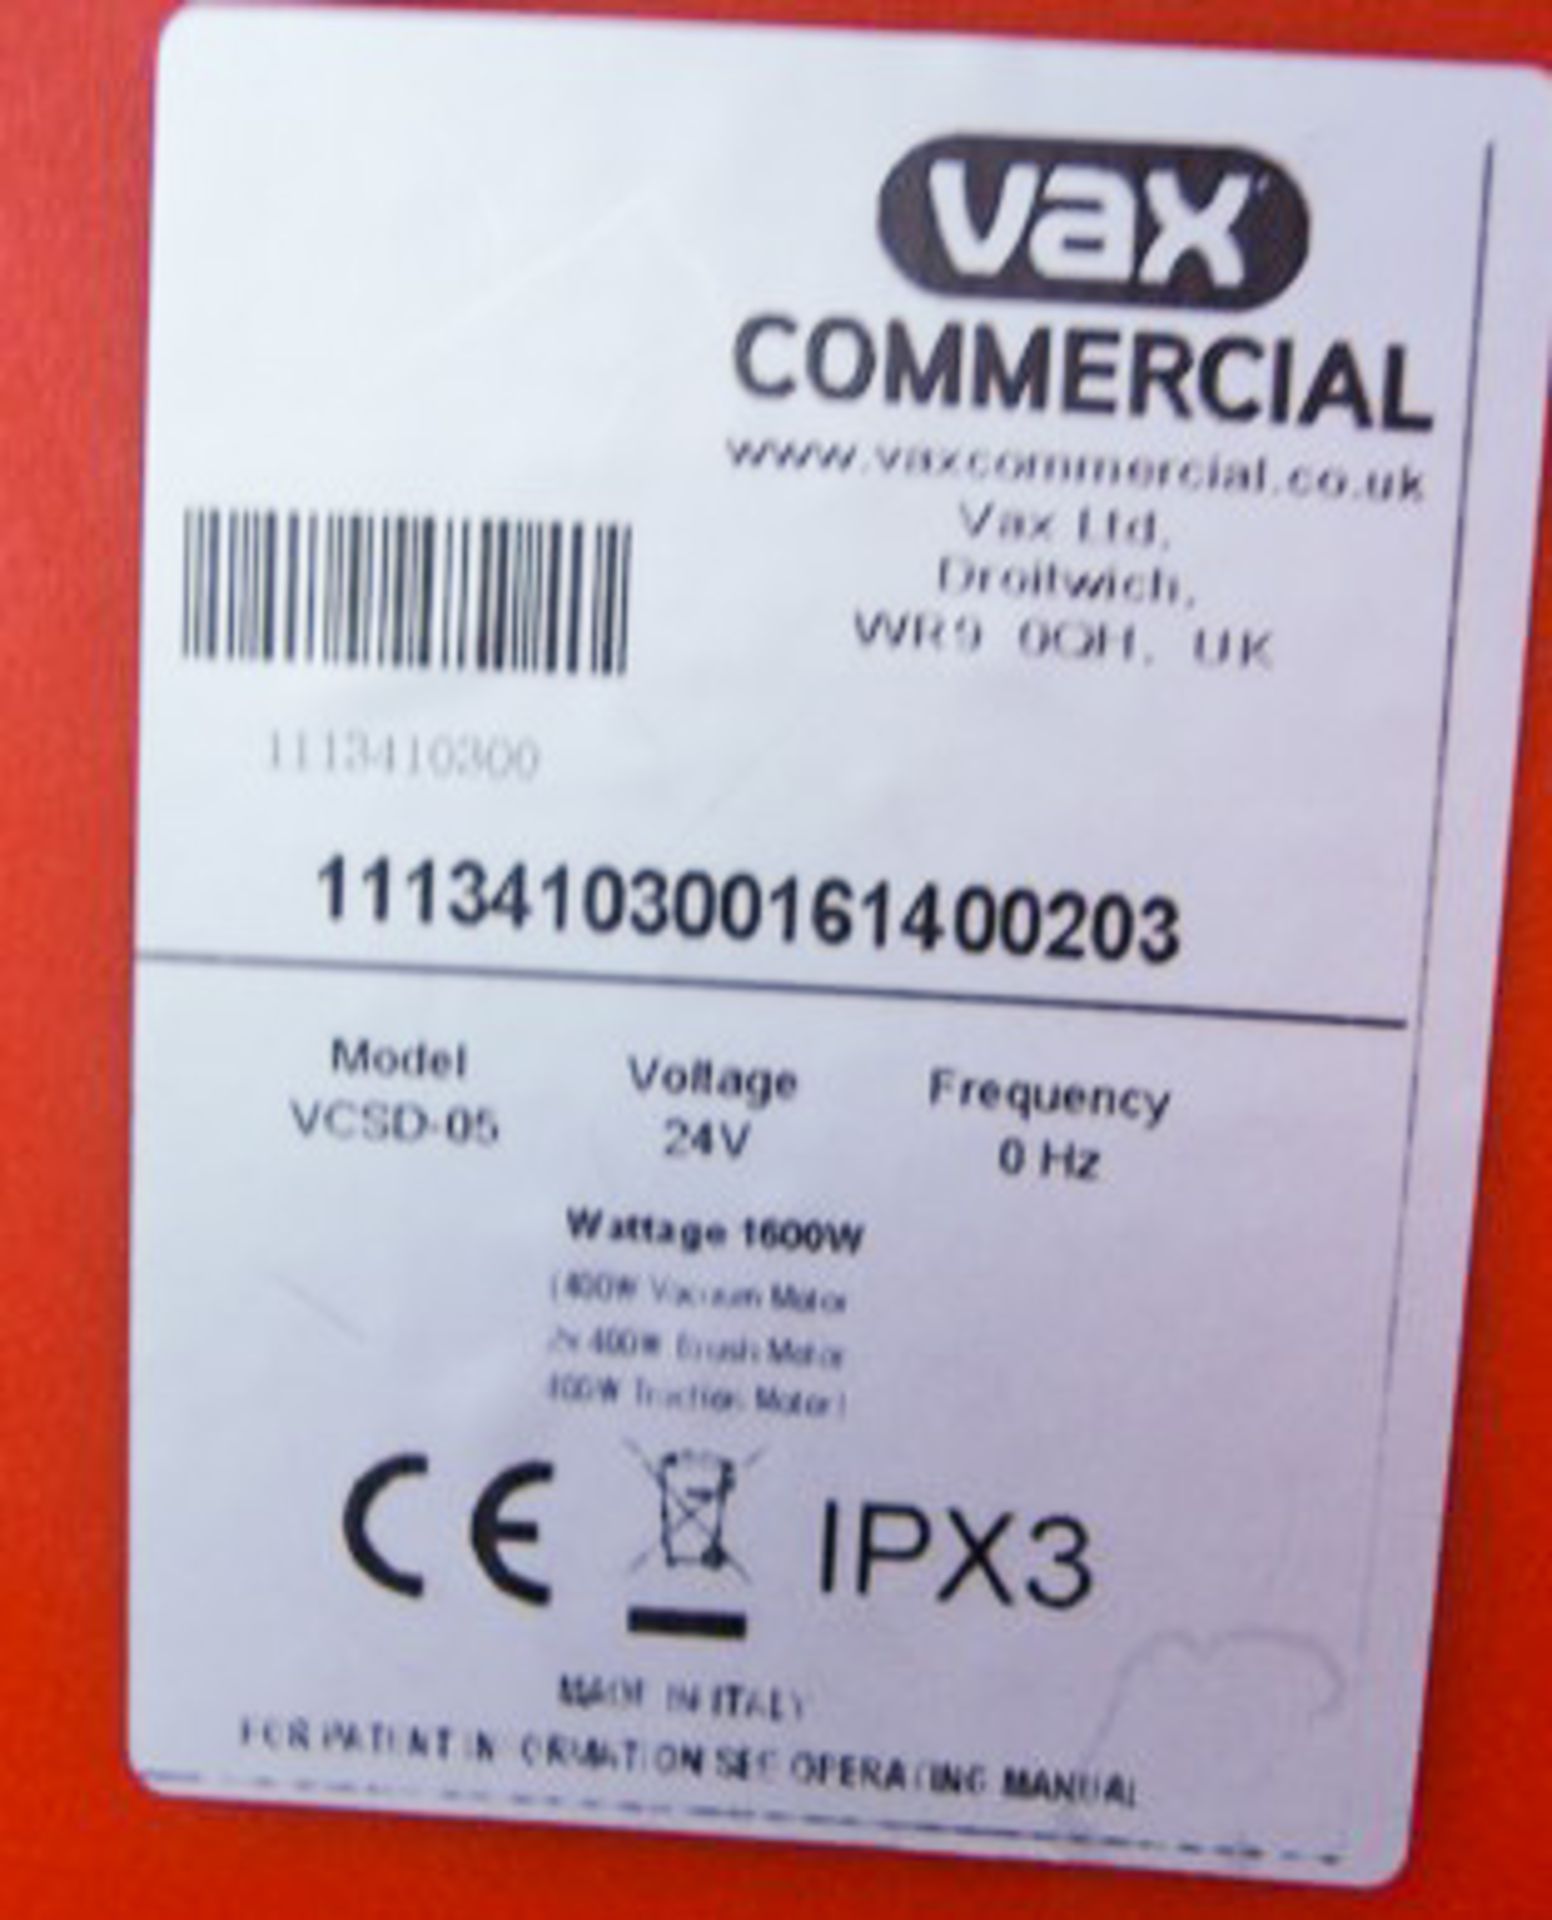 VAX VCSD-05 COMMERCIAL FLOOR CLEANER, MAINS CHARGER, 123HRS (NOT VERIFIED) - Image 7 of 8